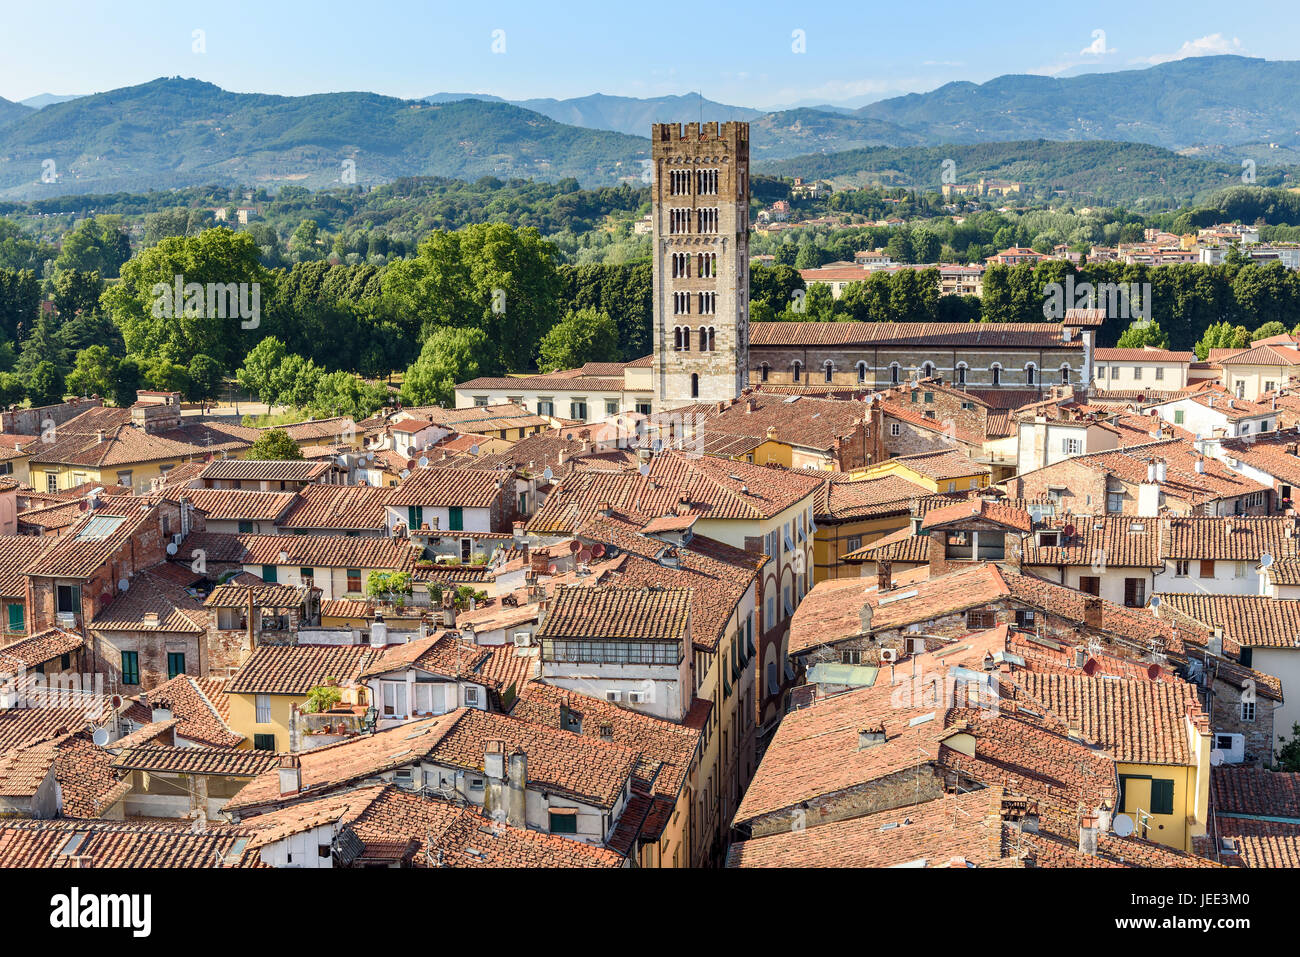 medieval town of Lucca with San Frediano bell tower, tuscany, italy Stock Photo